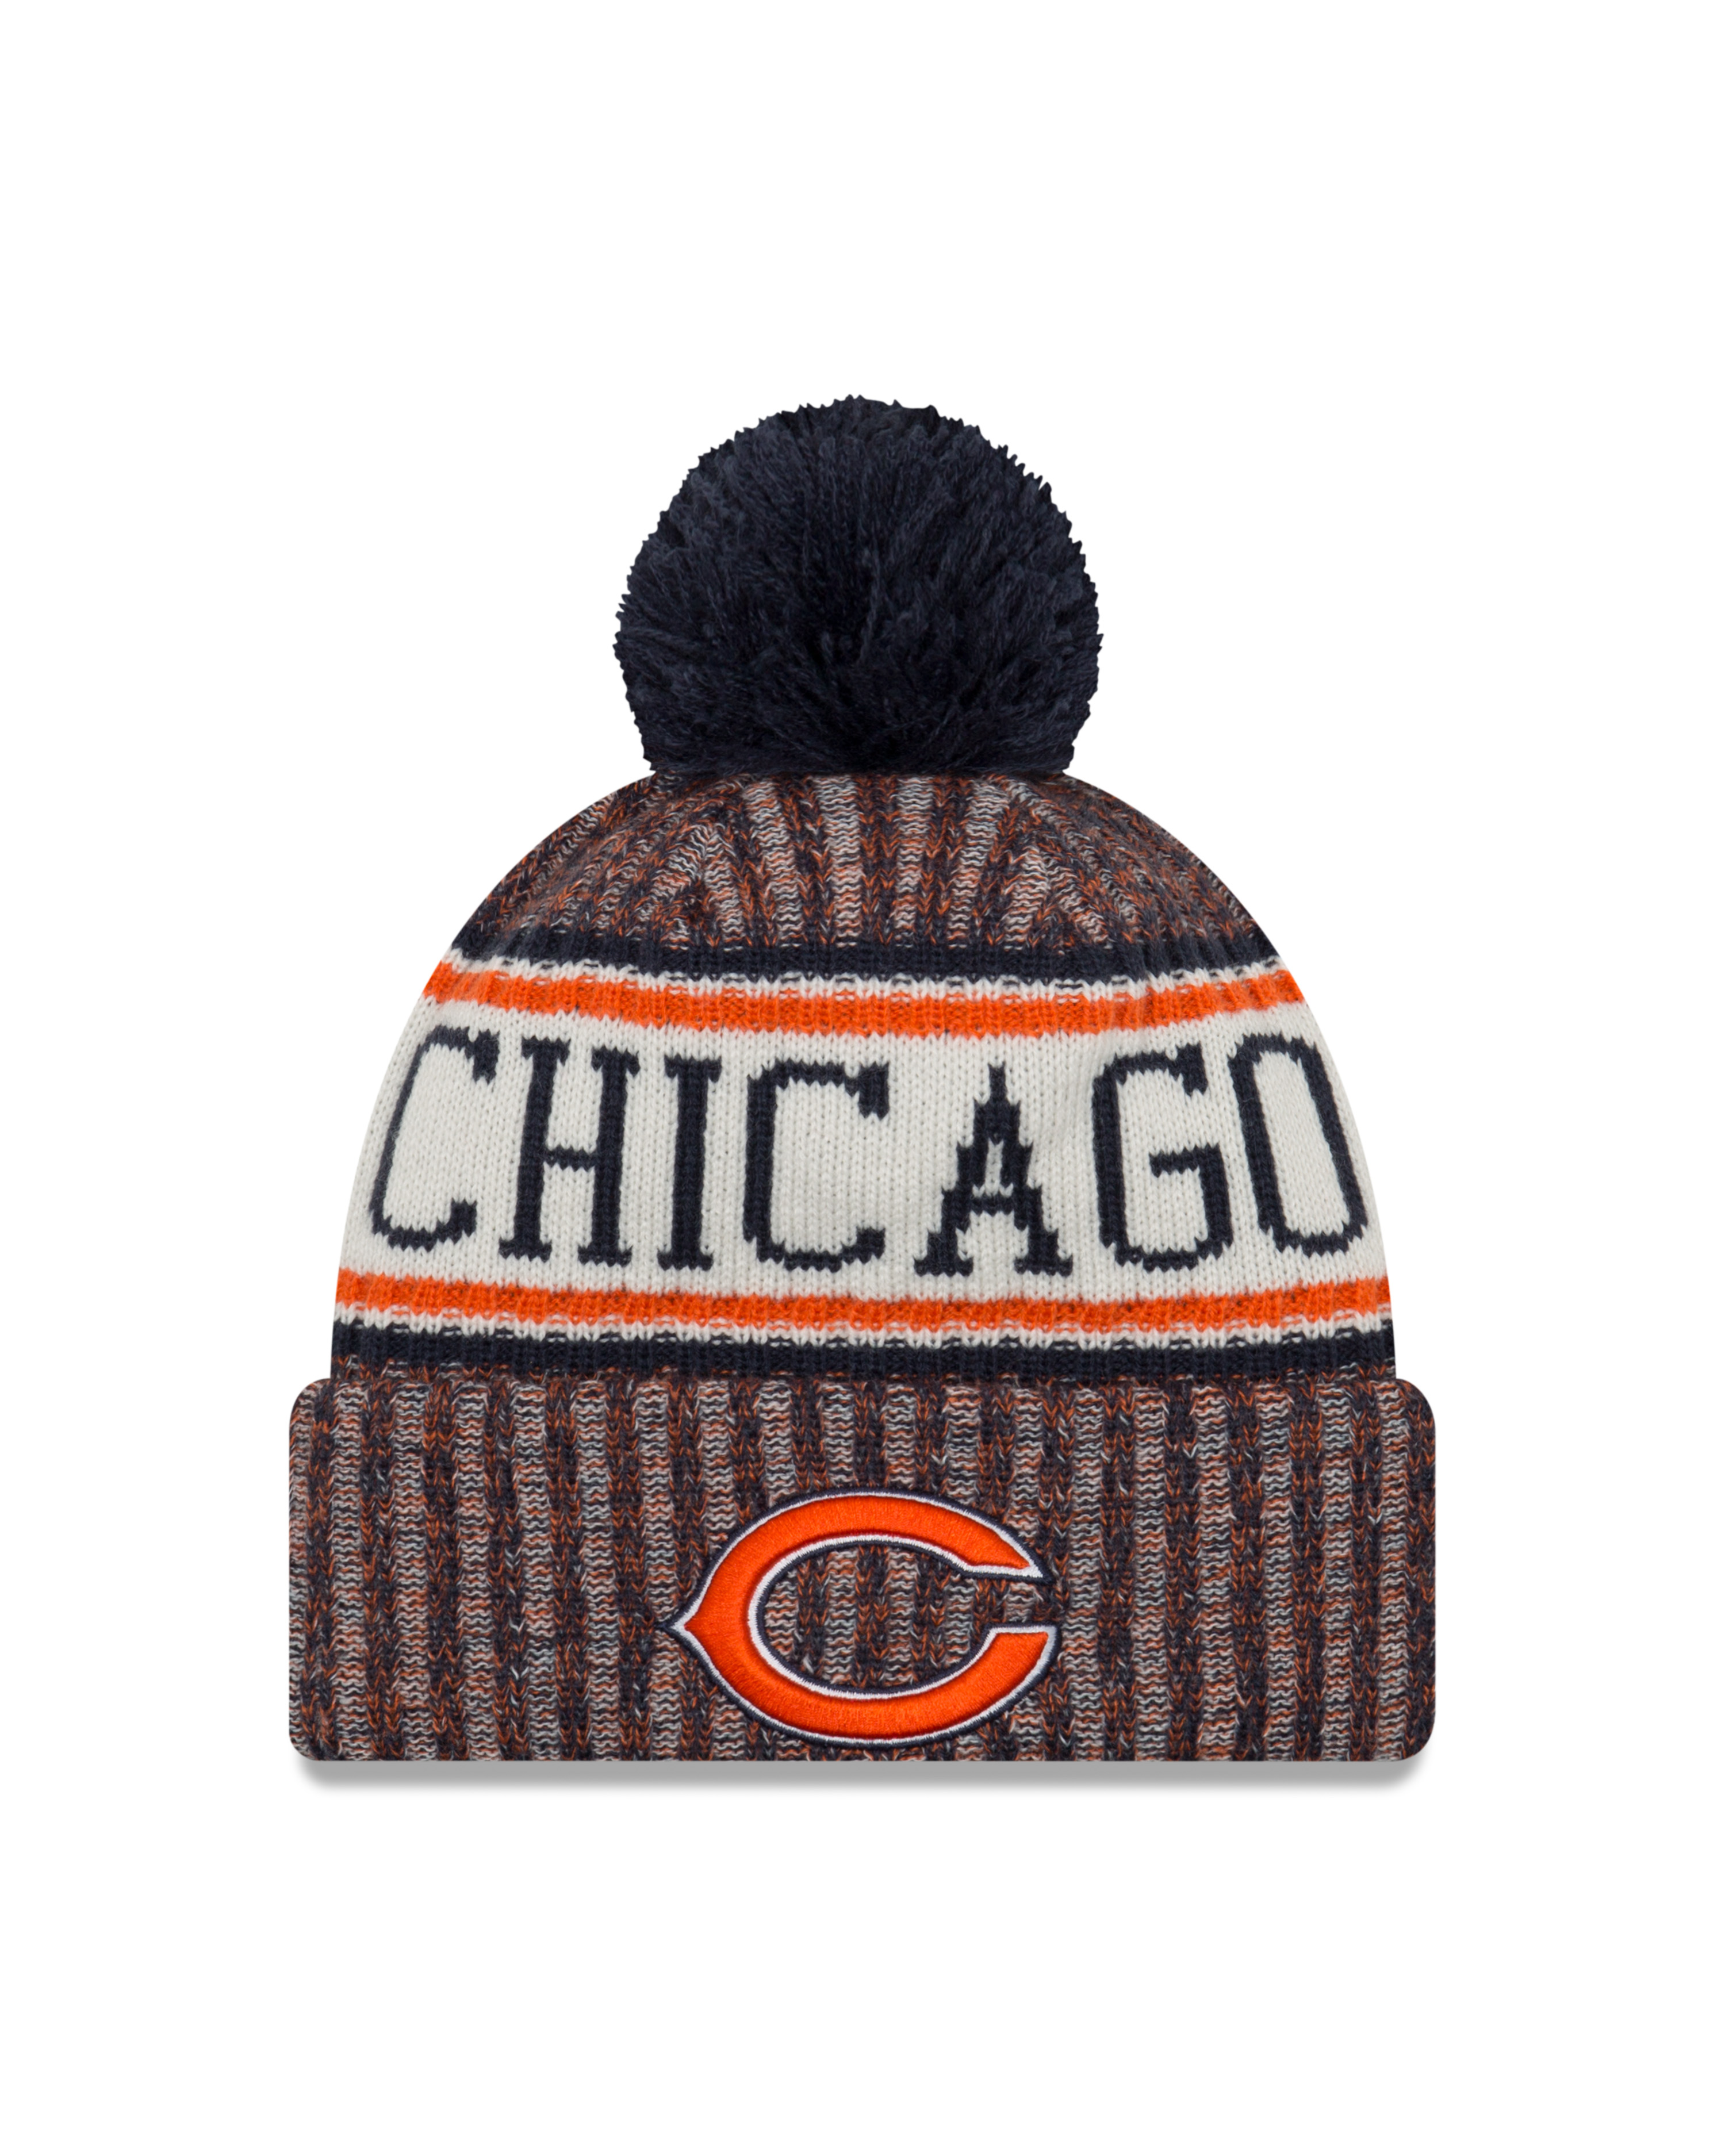 New Era Official NFL Cold Weather Collection #58